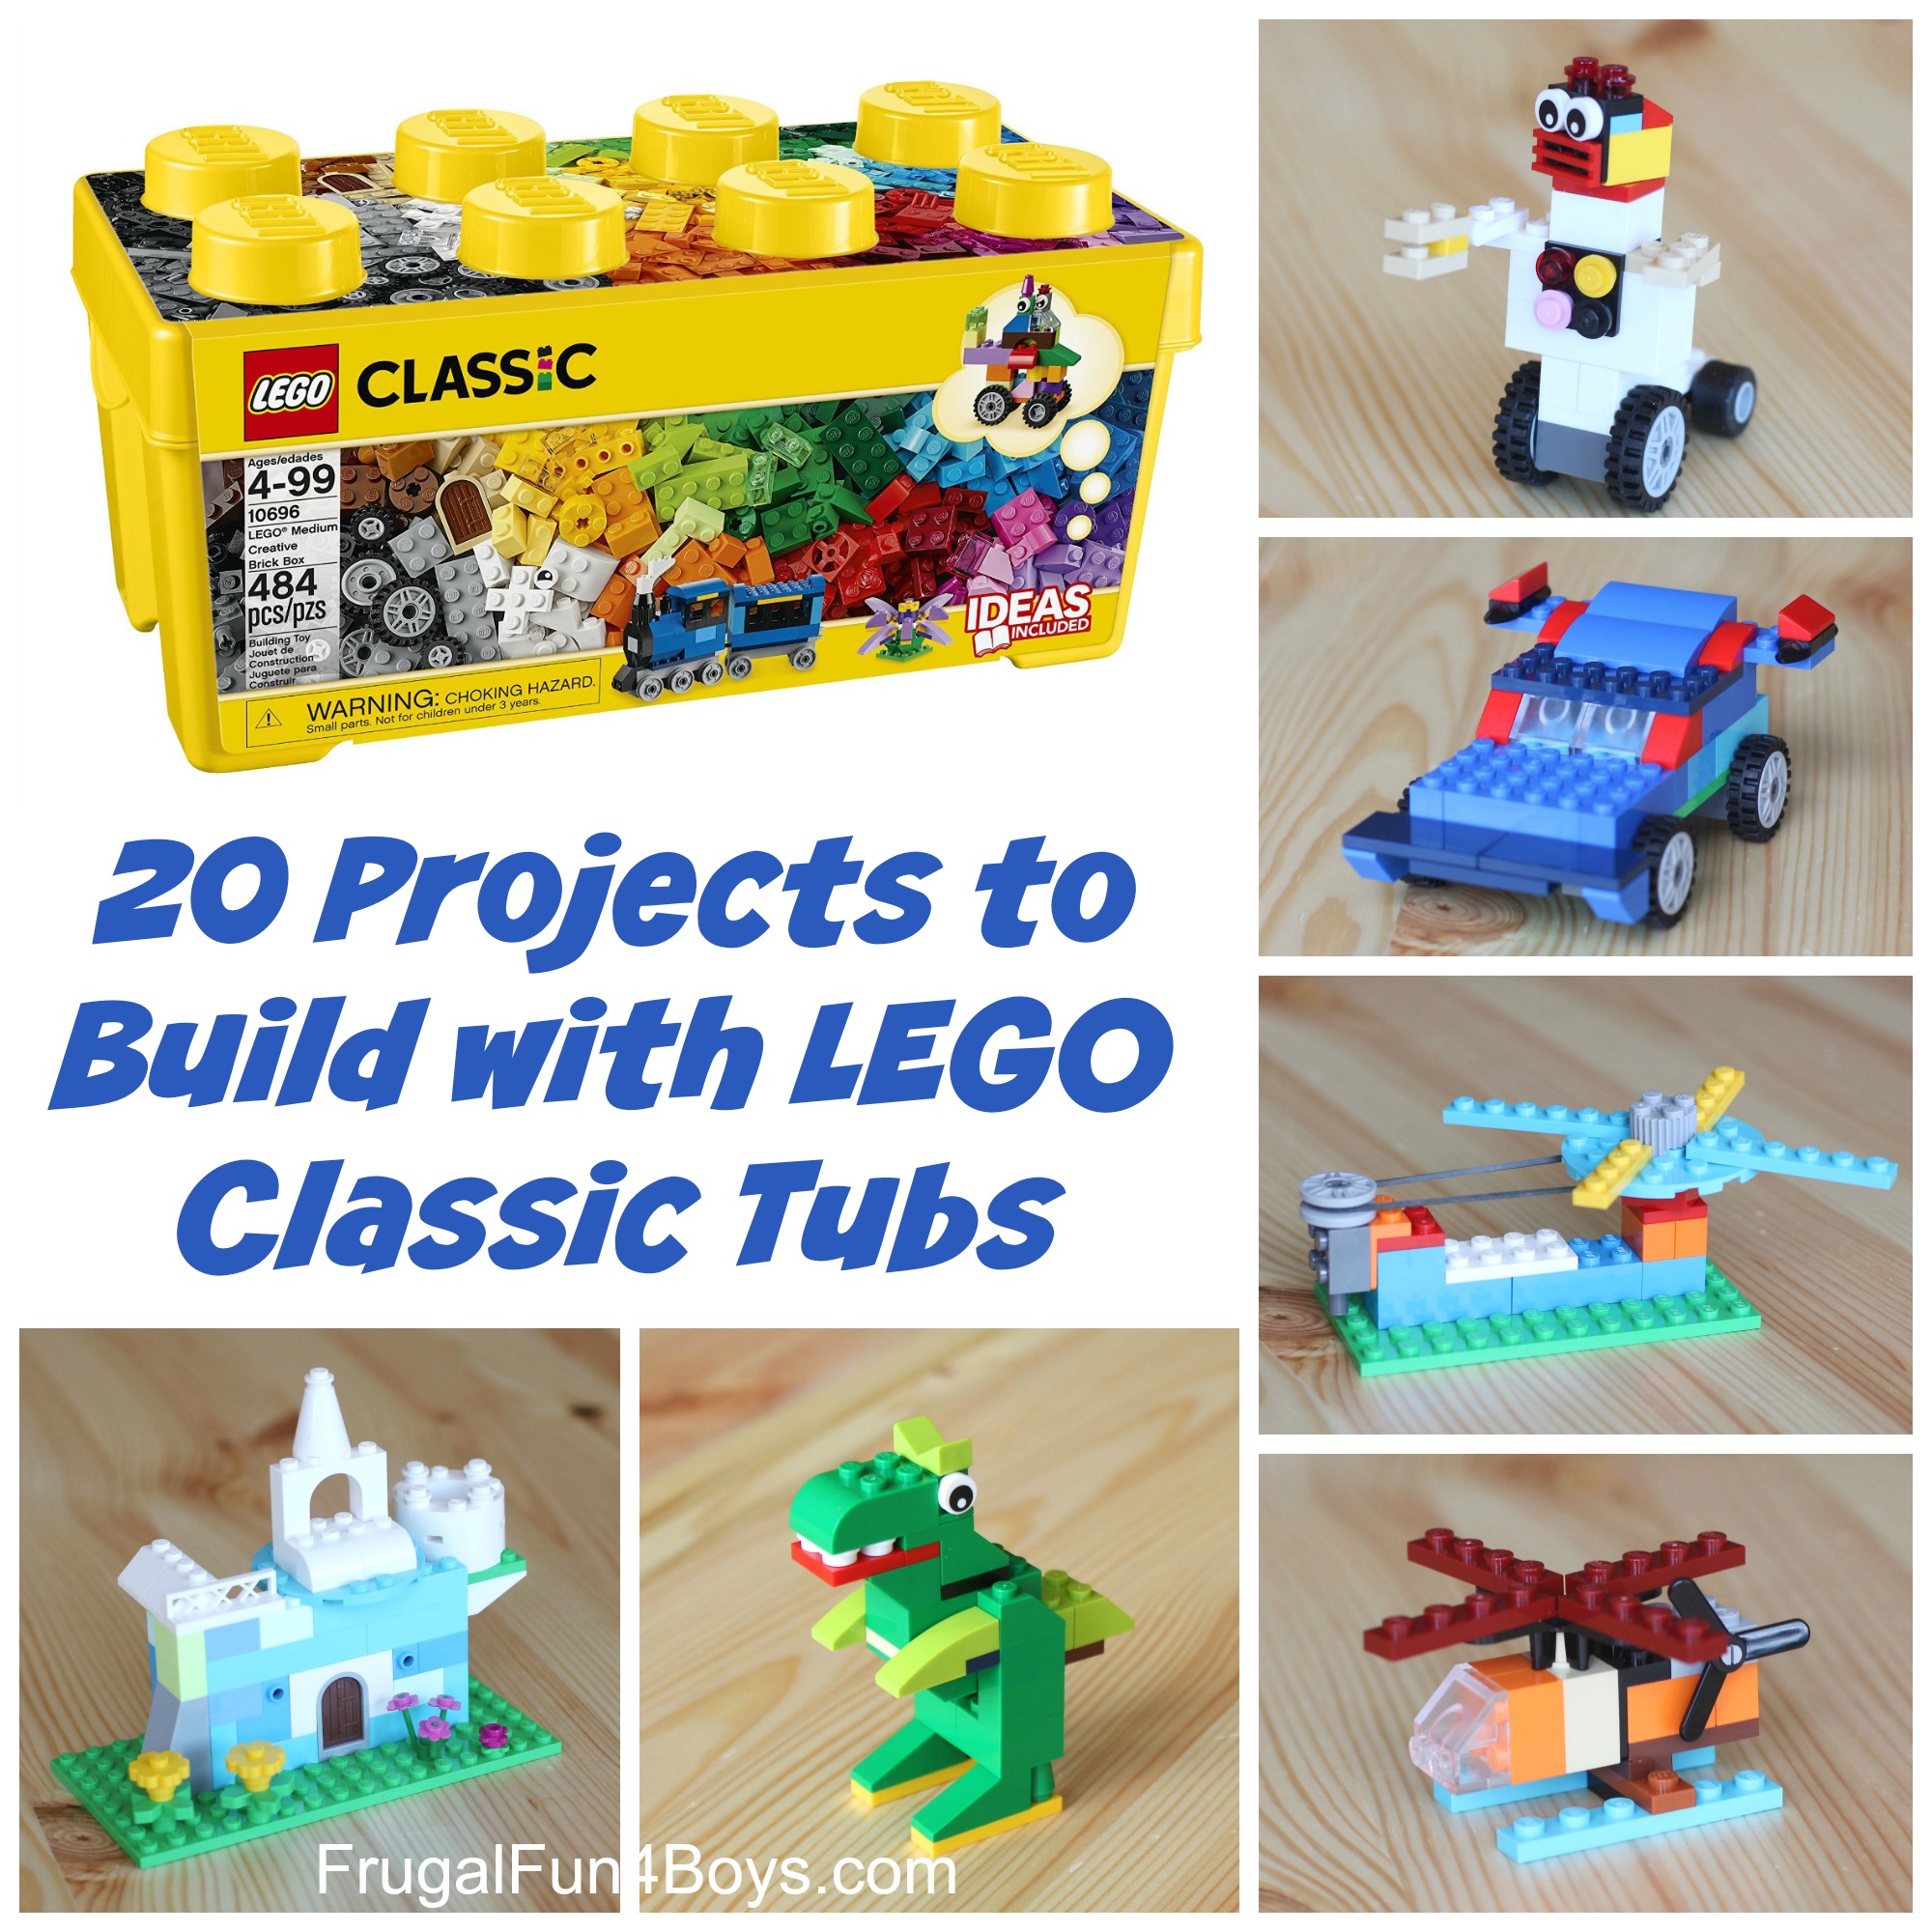 20 Simple Projects for Beginning LEGO Builders - Frugal Fun For Boys and Girls